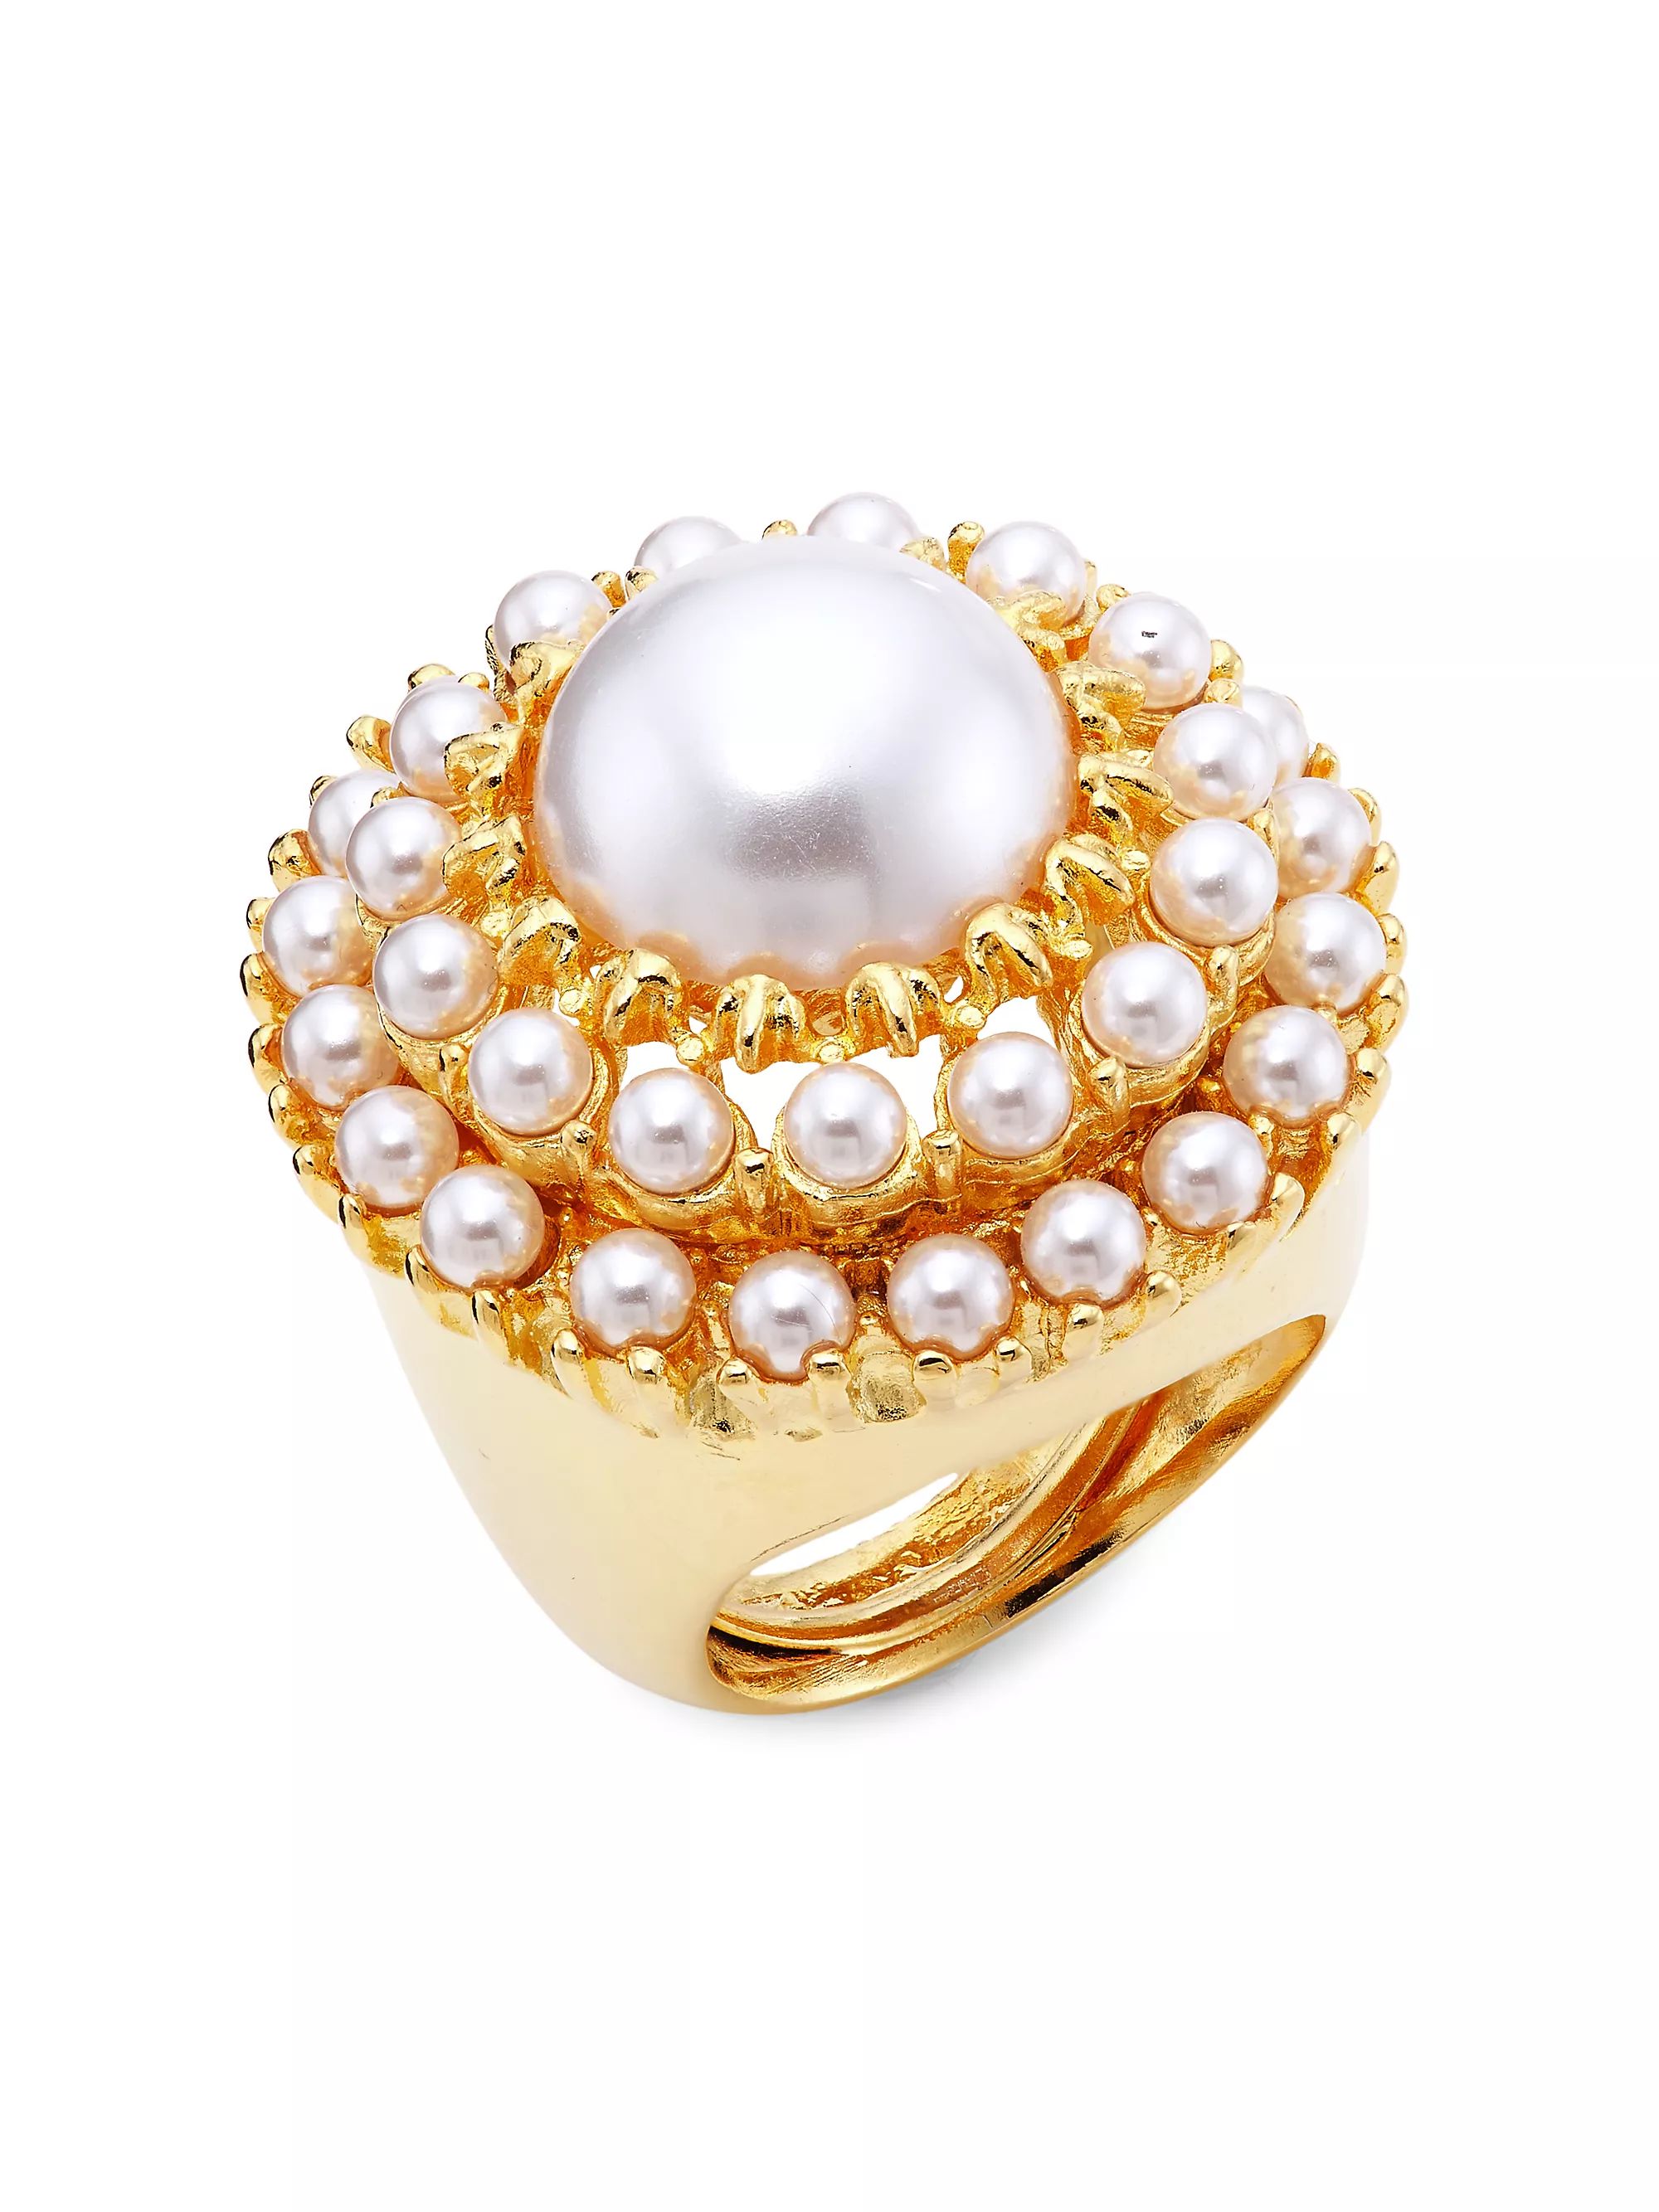 22K Gold-Plated & Faux Pearls Ring | Saks Fifth Avenue